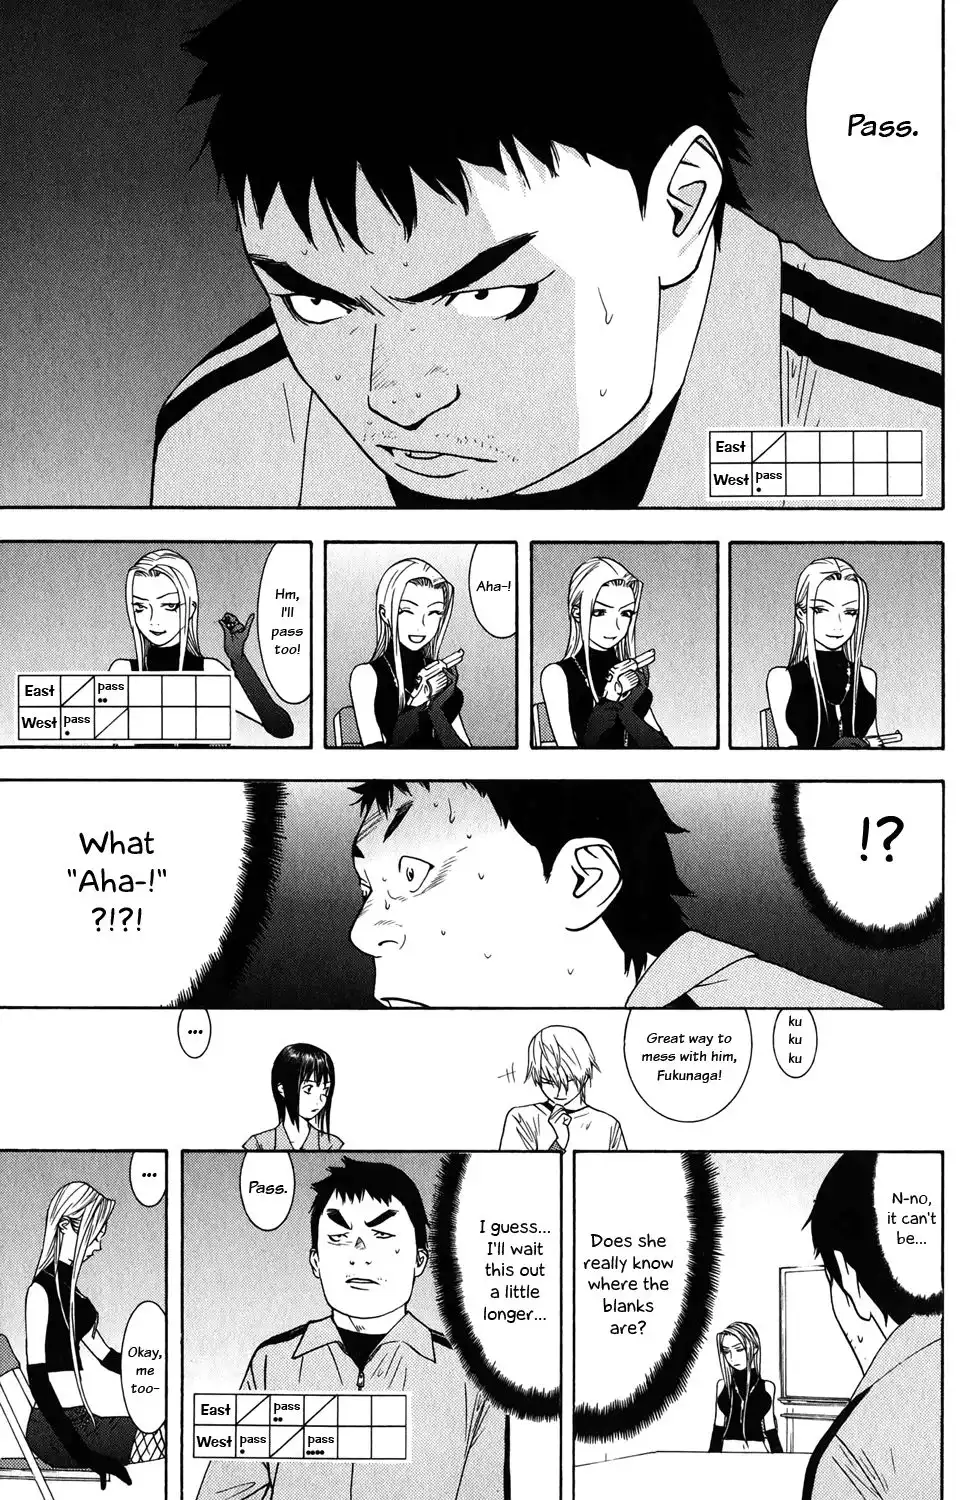 Liar Game Chapter 63